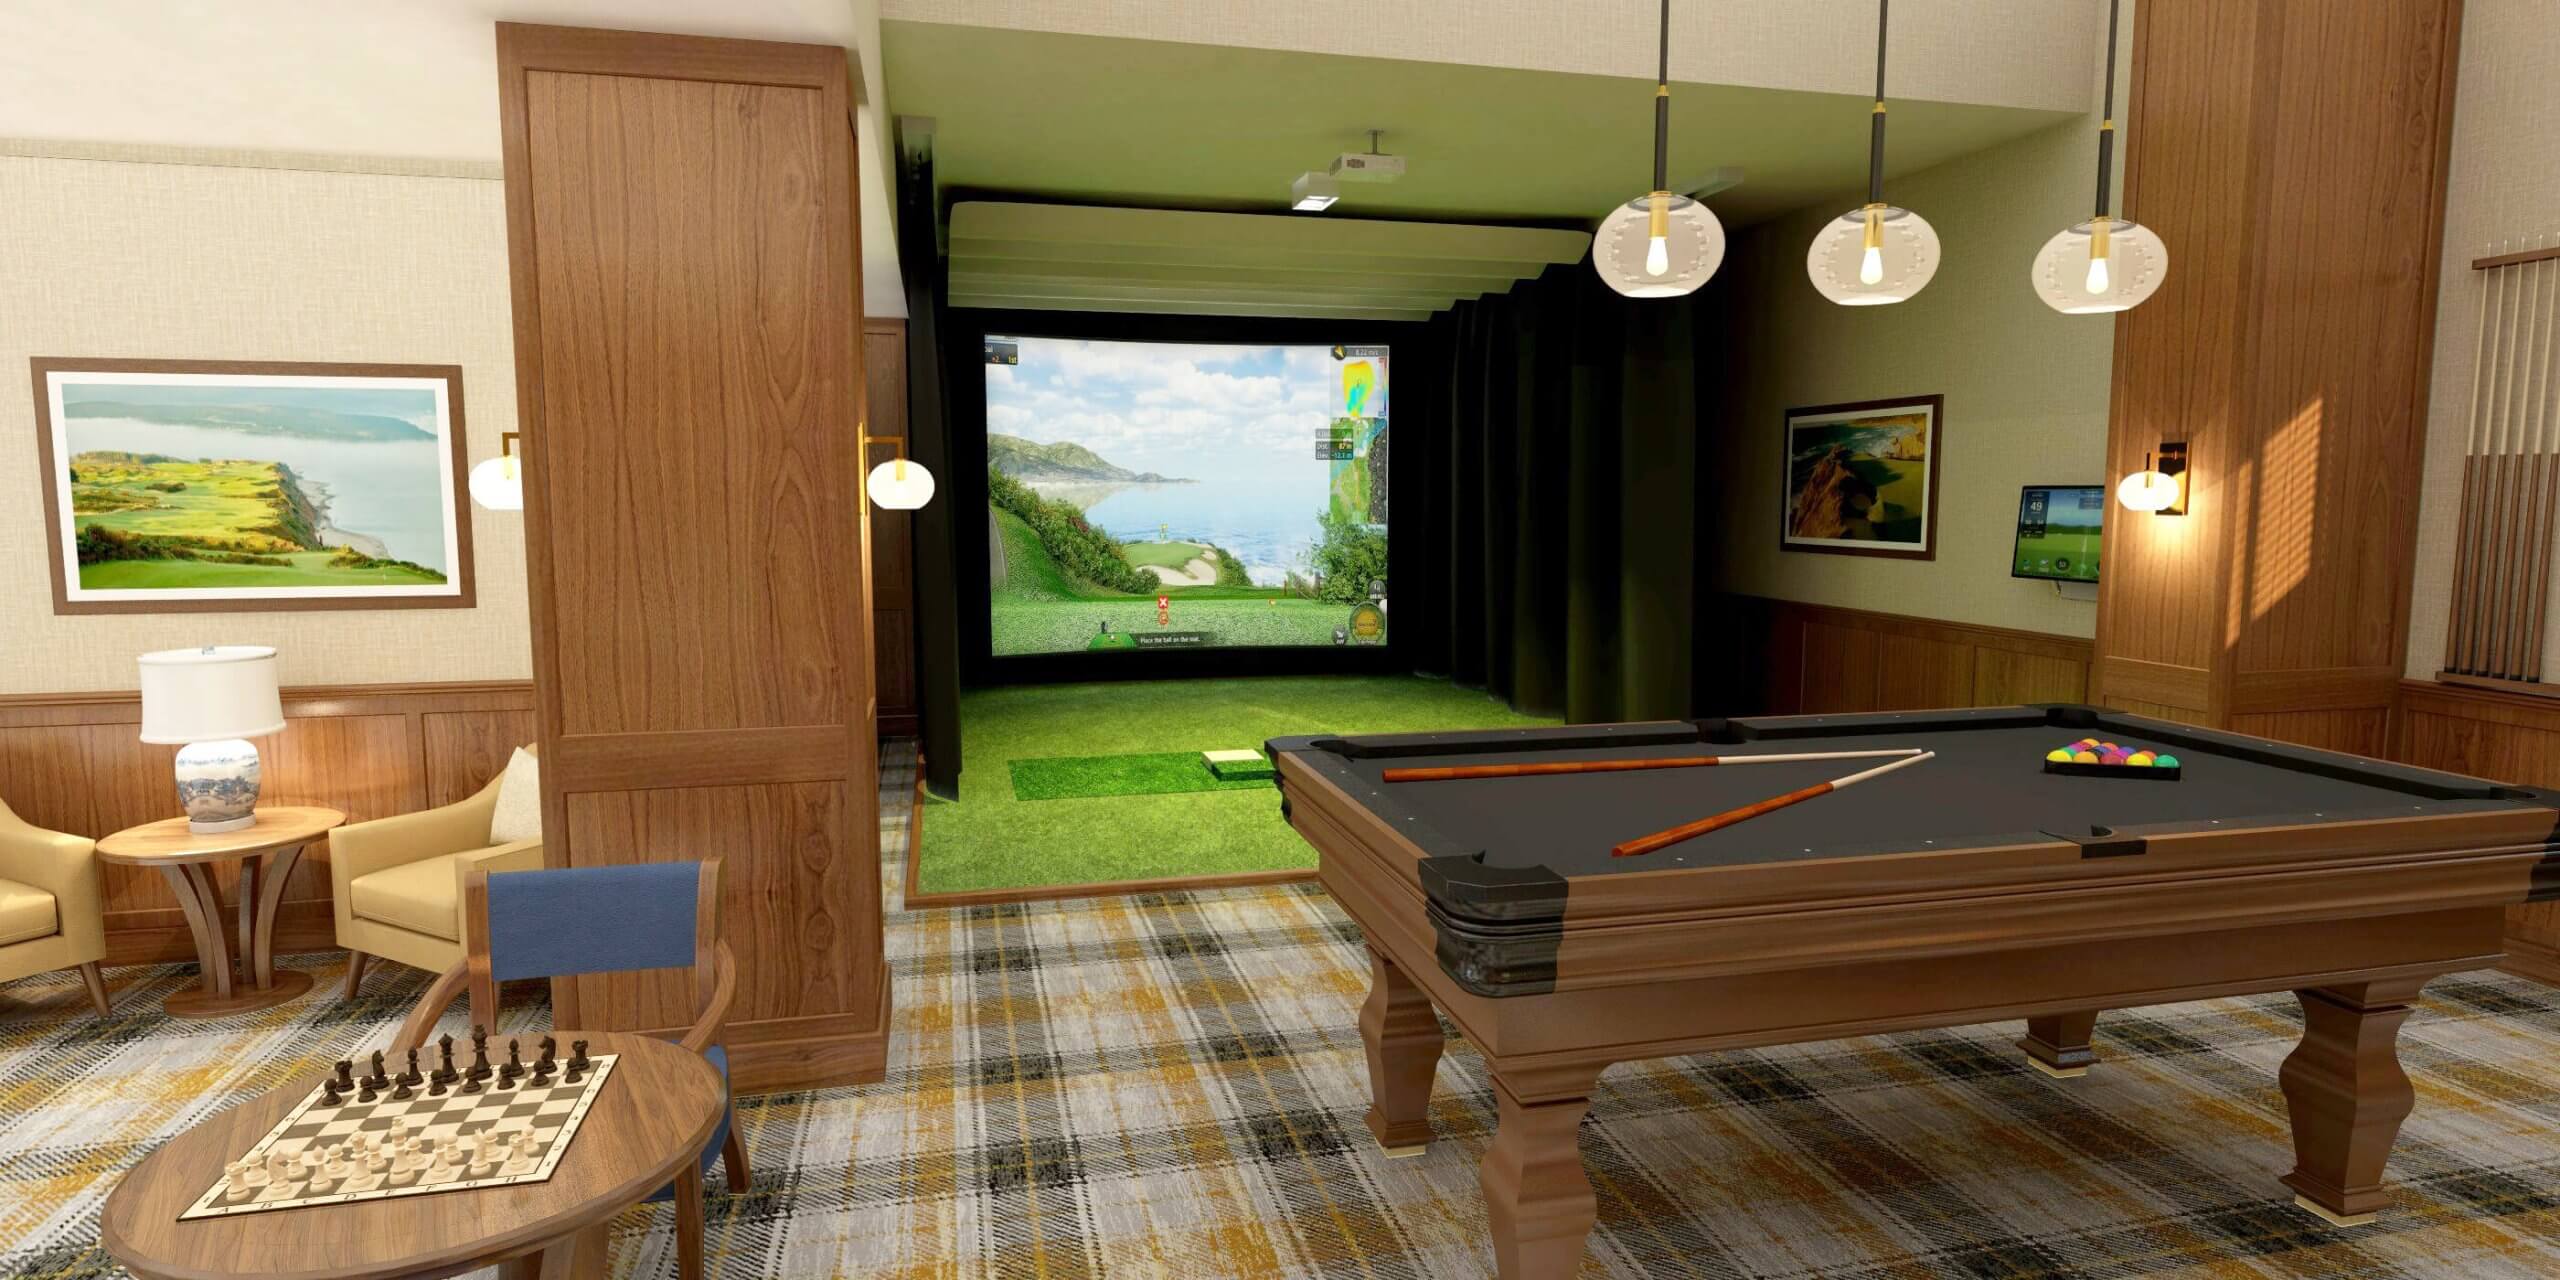 Games room complete with pool table, golf simulator, comfortable lounge chairs and plaid carpeting